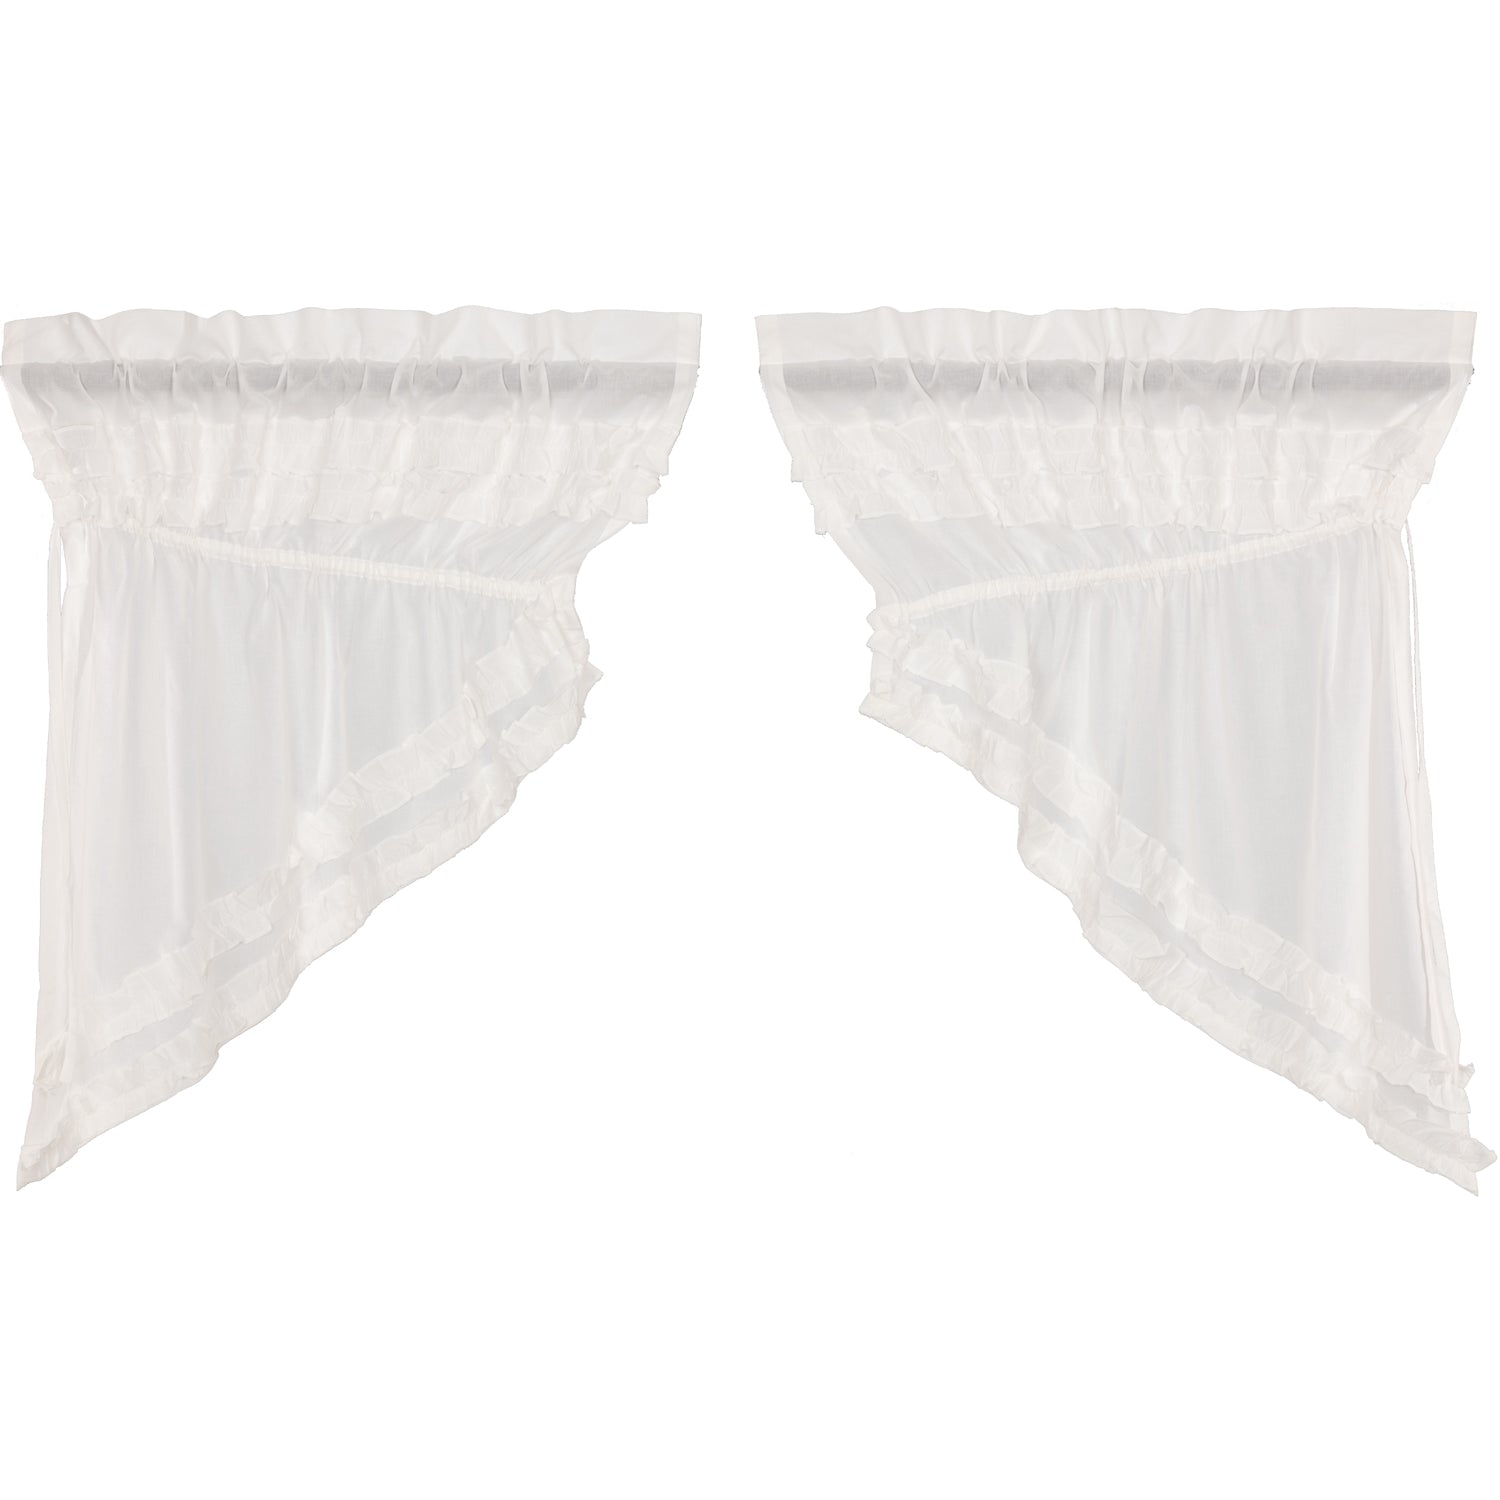 April & Olive White Ruffled Sheer Petticoat Prairie Swag Set of 2 36x36x18 By VHC Brands